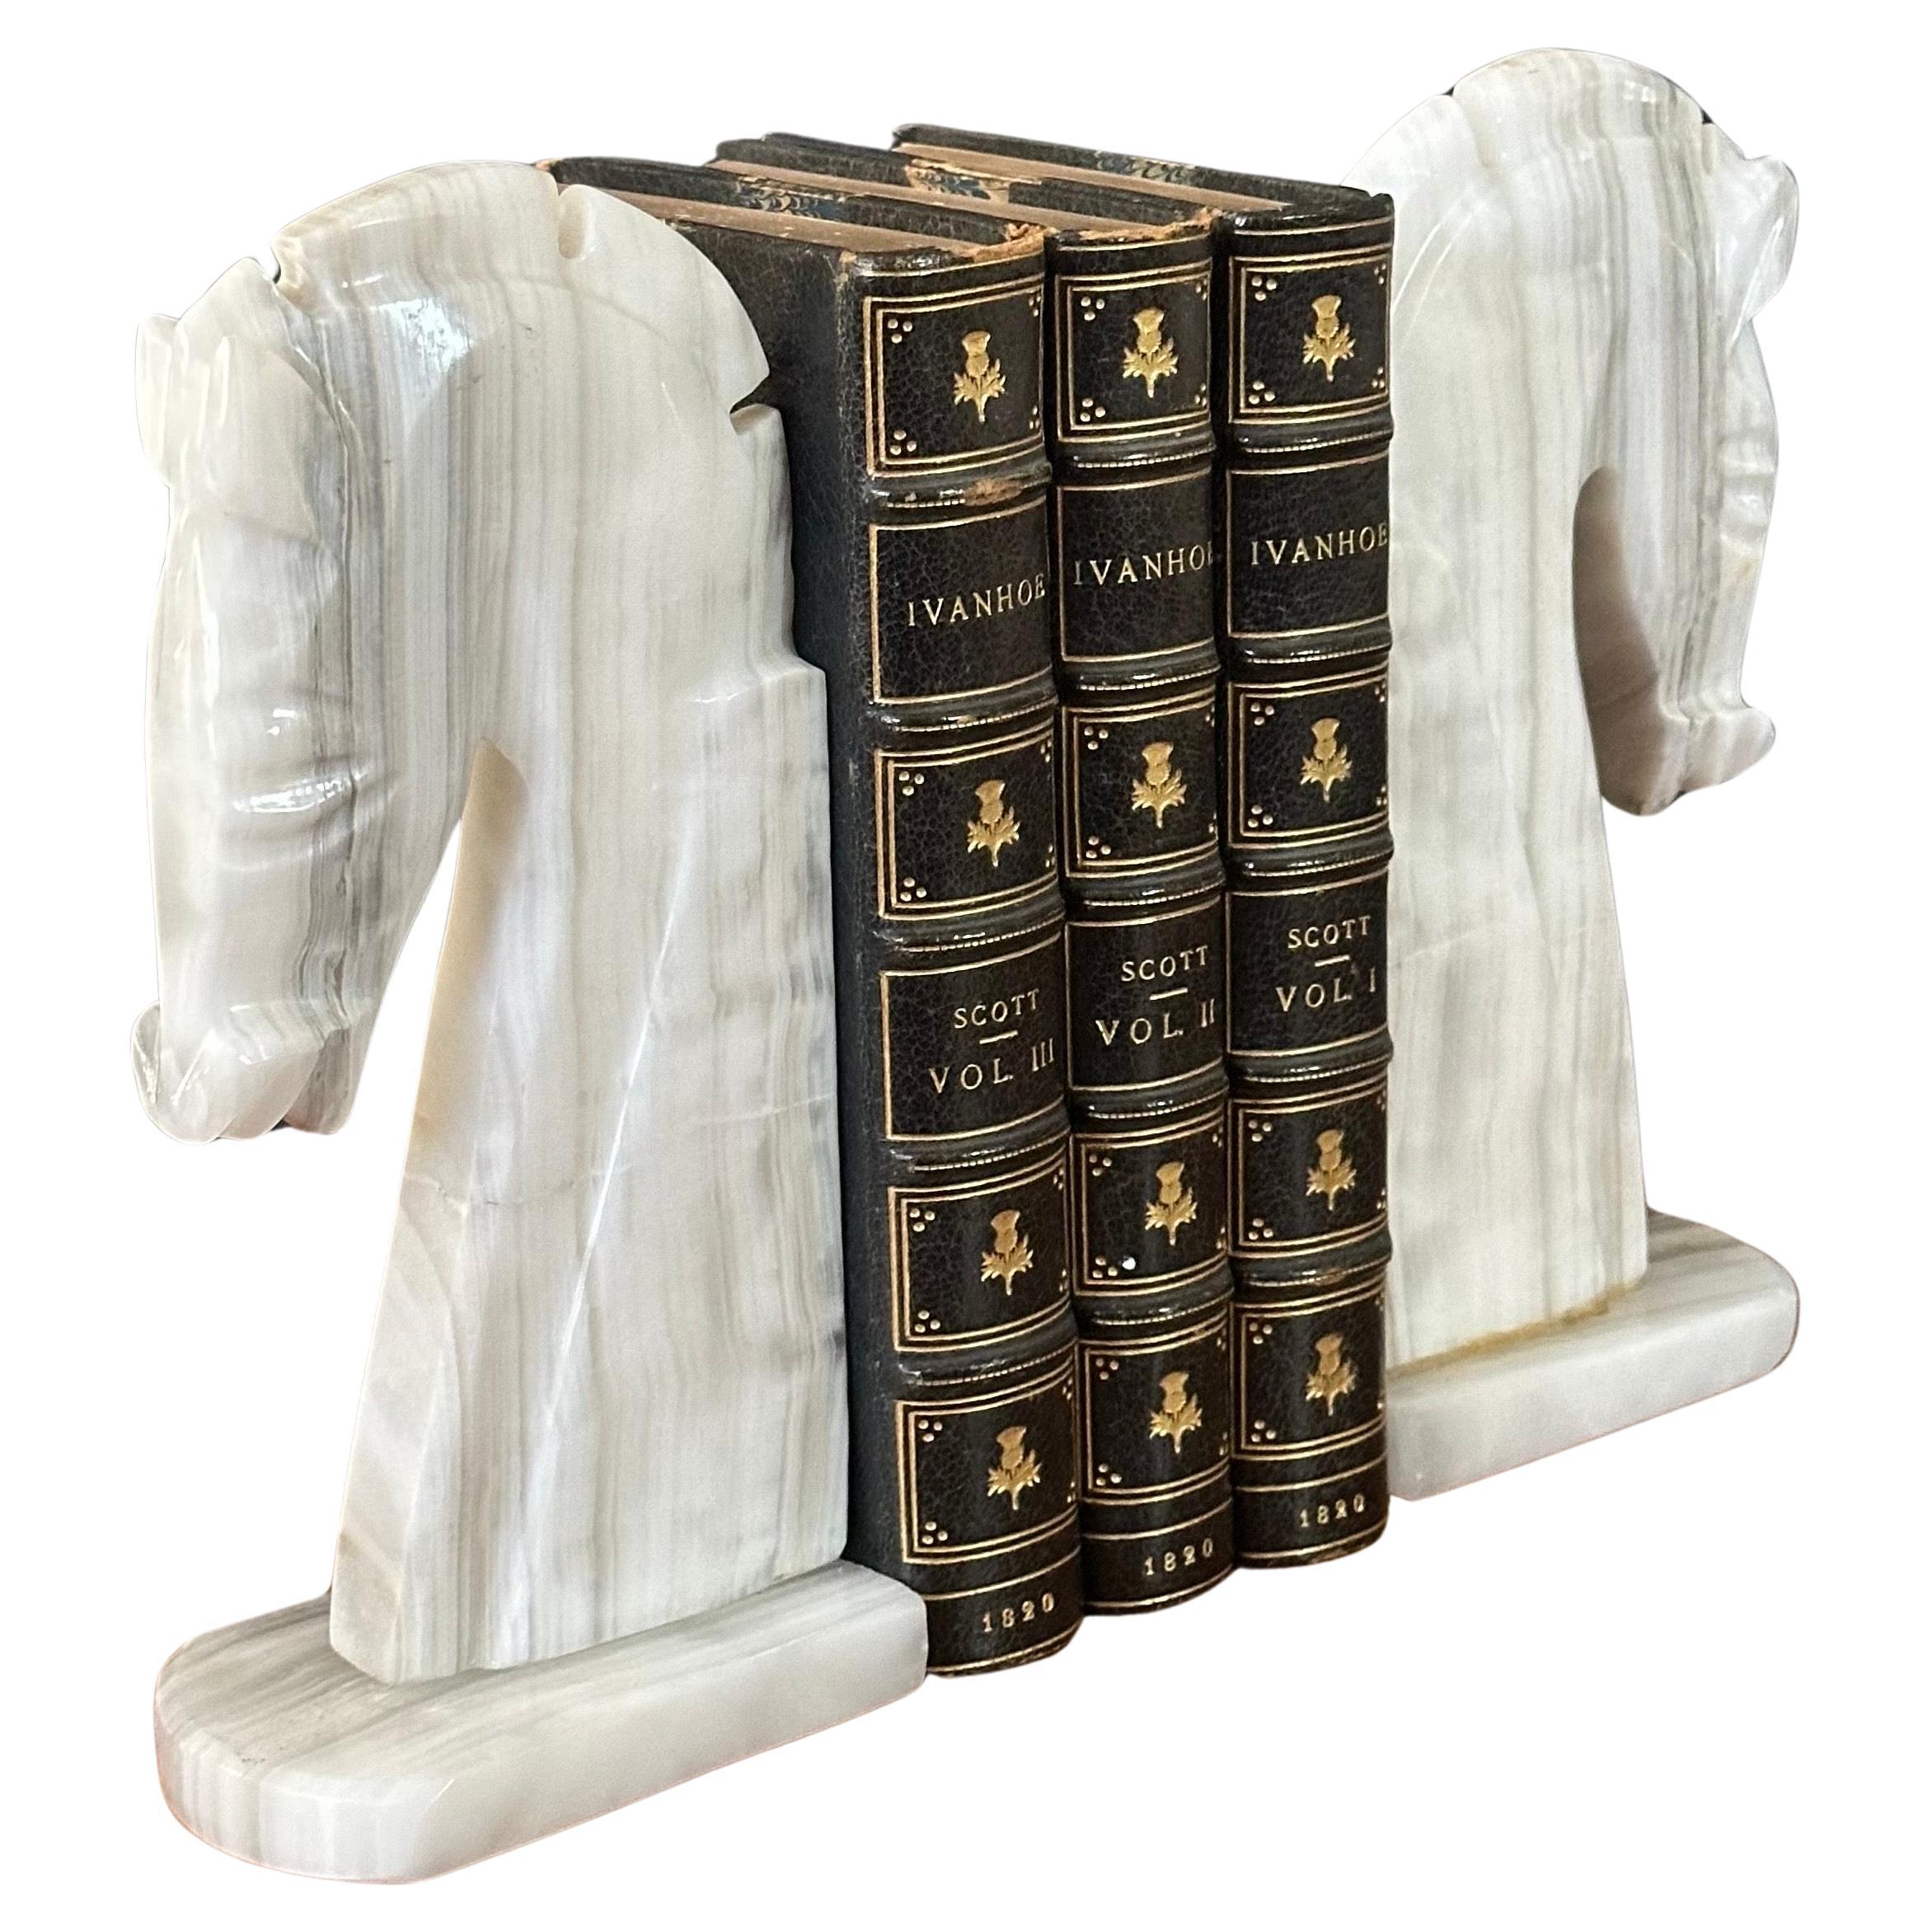 Very stylish pair of mid-century white marble horse head bookends, circa 1970s. The bookends are heavy and solid and well crafted. They measure 8